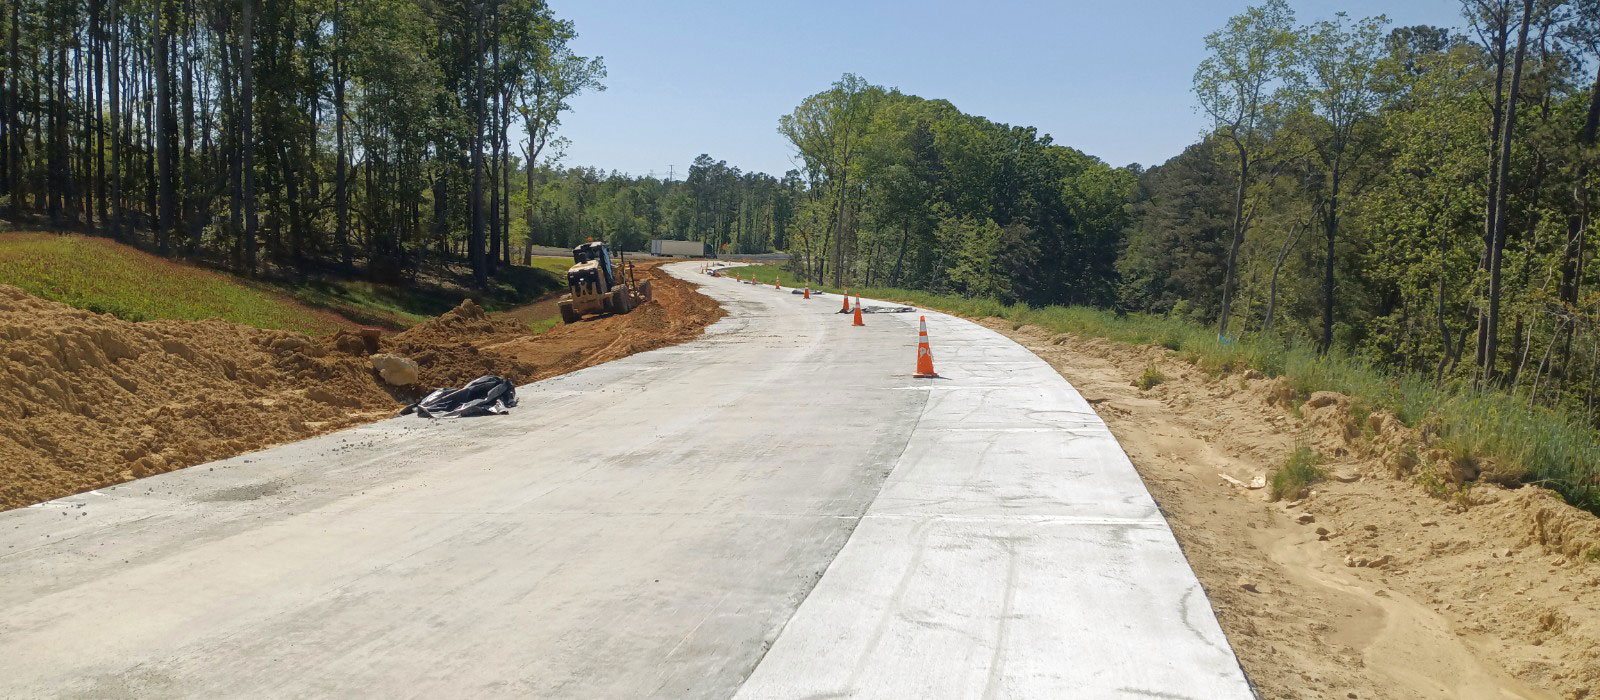 New ramps of concrete pavement are included at each of the interchanges.  This ramp will be the future I-26 Westbound on-ramp at Exit 91 in Chapin